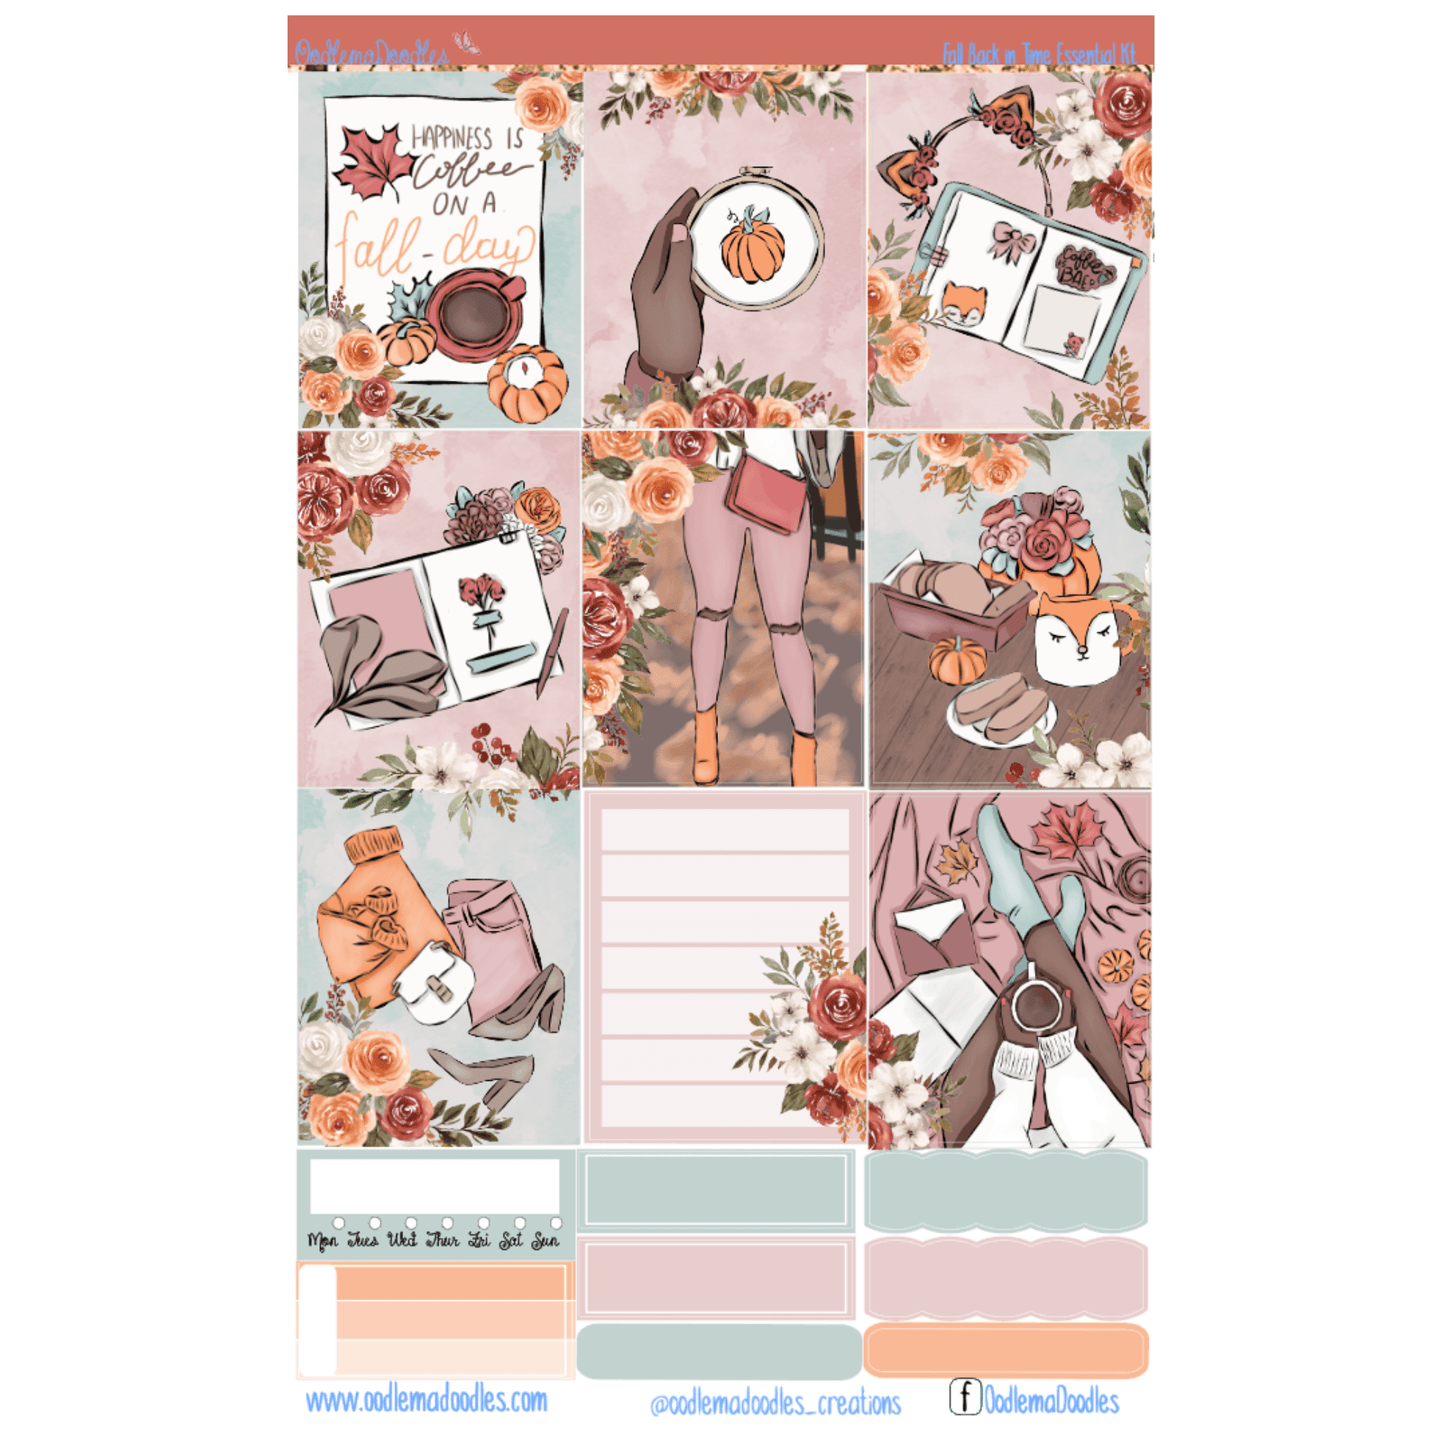 Fall Back in Time Essential Planner Sticker Kit